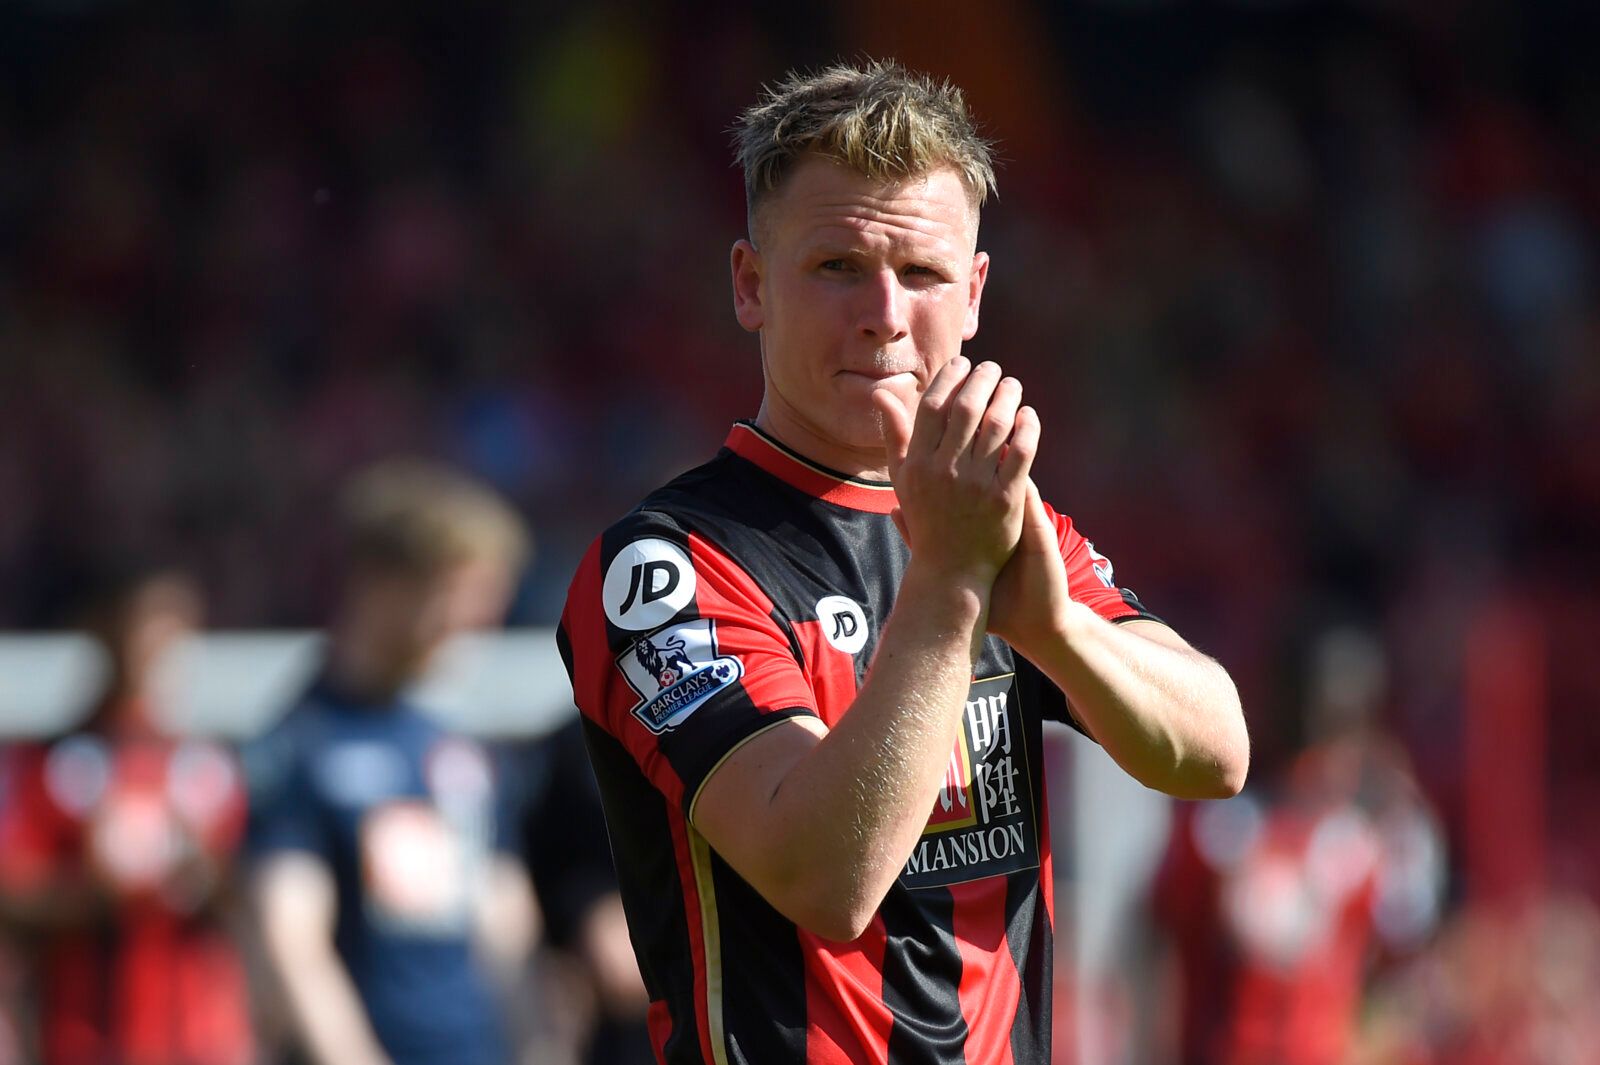 Britain Soccer Football - AFC Bournemouth v West Bromwich Albion - Barclays Premier League - Vitality Stadium - 15/16 - 7/5/16 
Bournemouth's Matt Ritchie applauds the fans after the game 
Reuters / Toby Melville 
EDITORIAL USE ONLY. No use with unauthorized audio, video, data, fixture lists, club/league logos or 